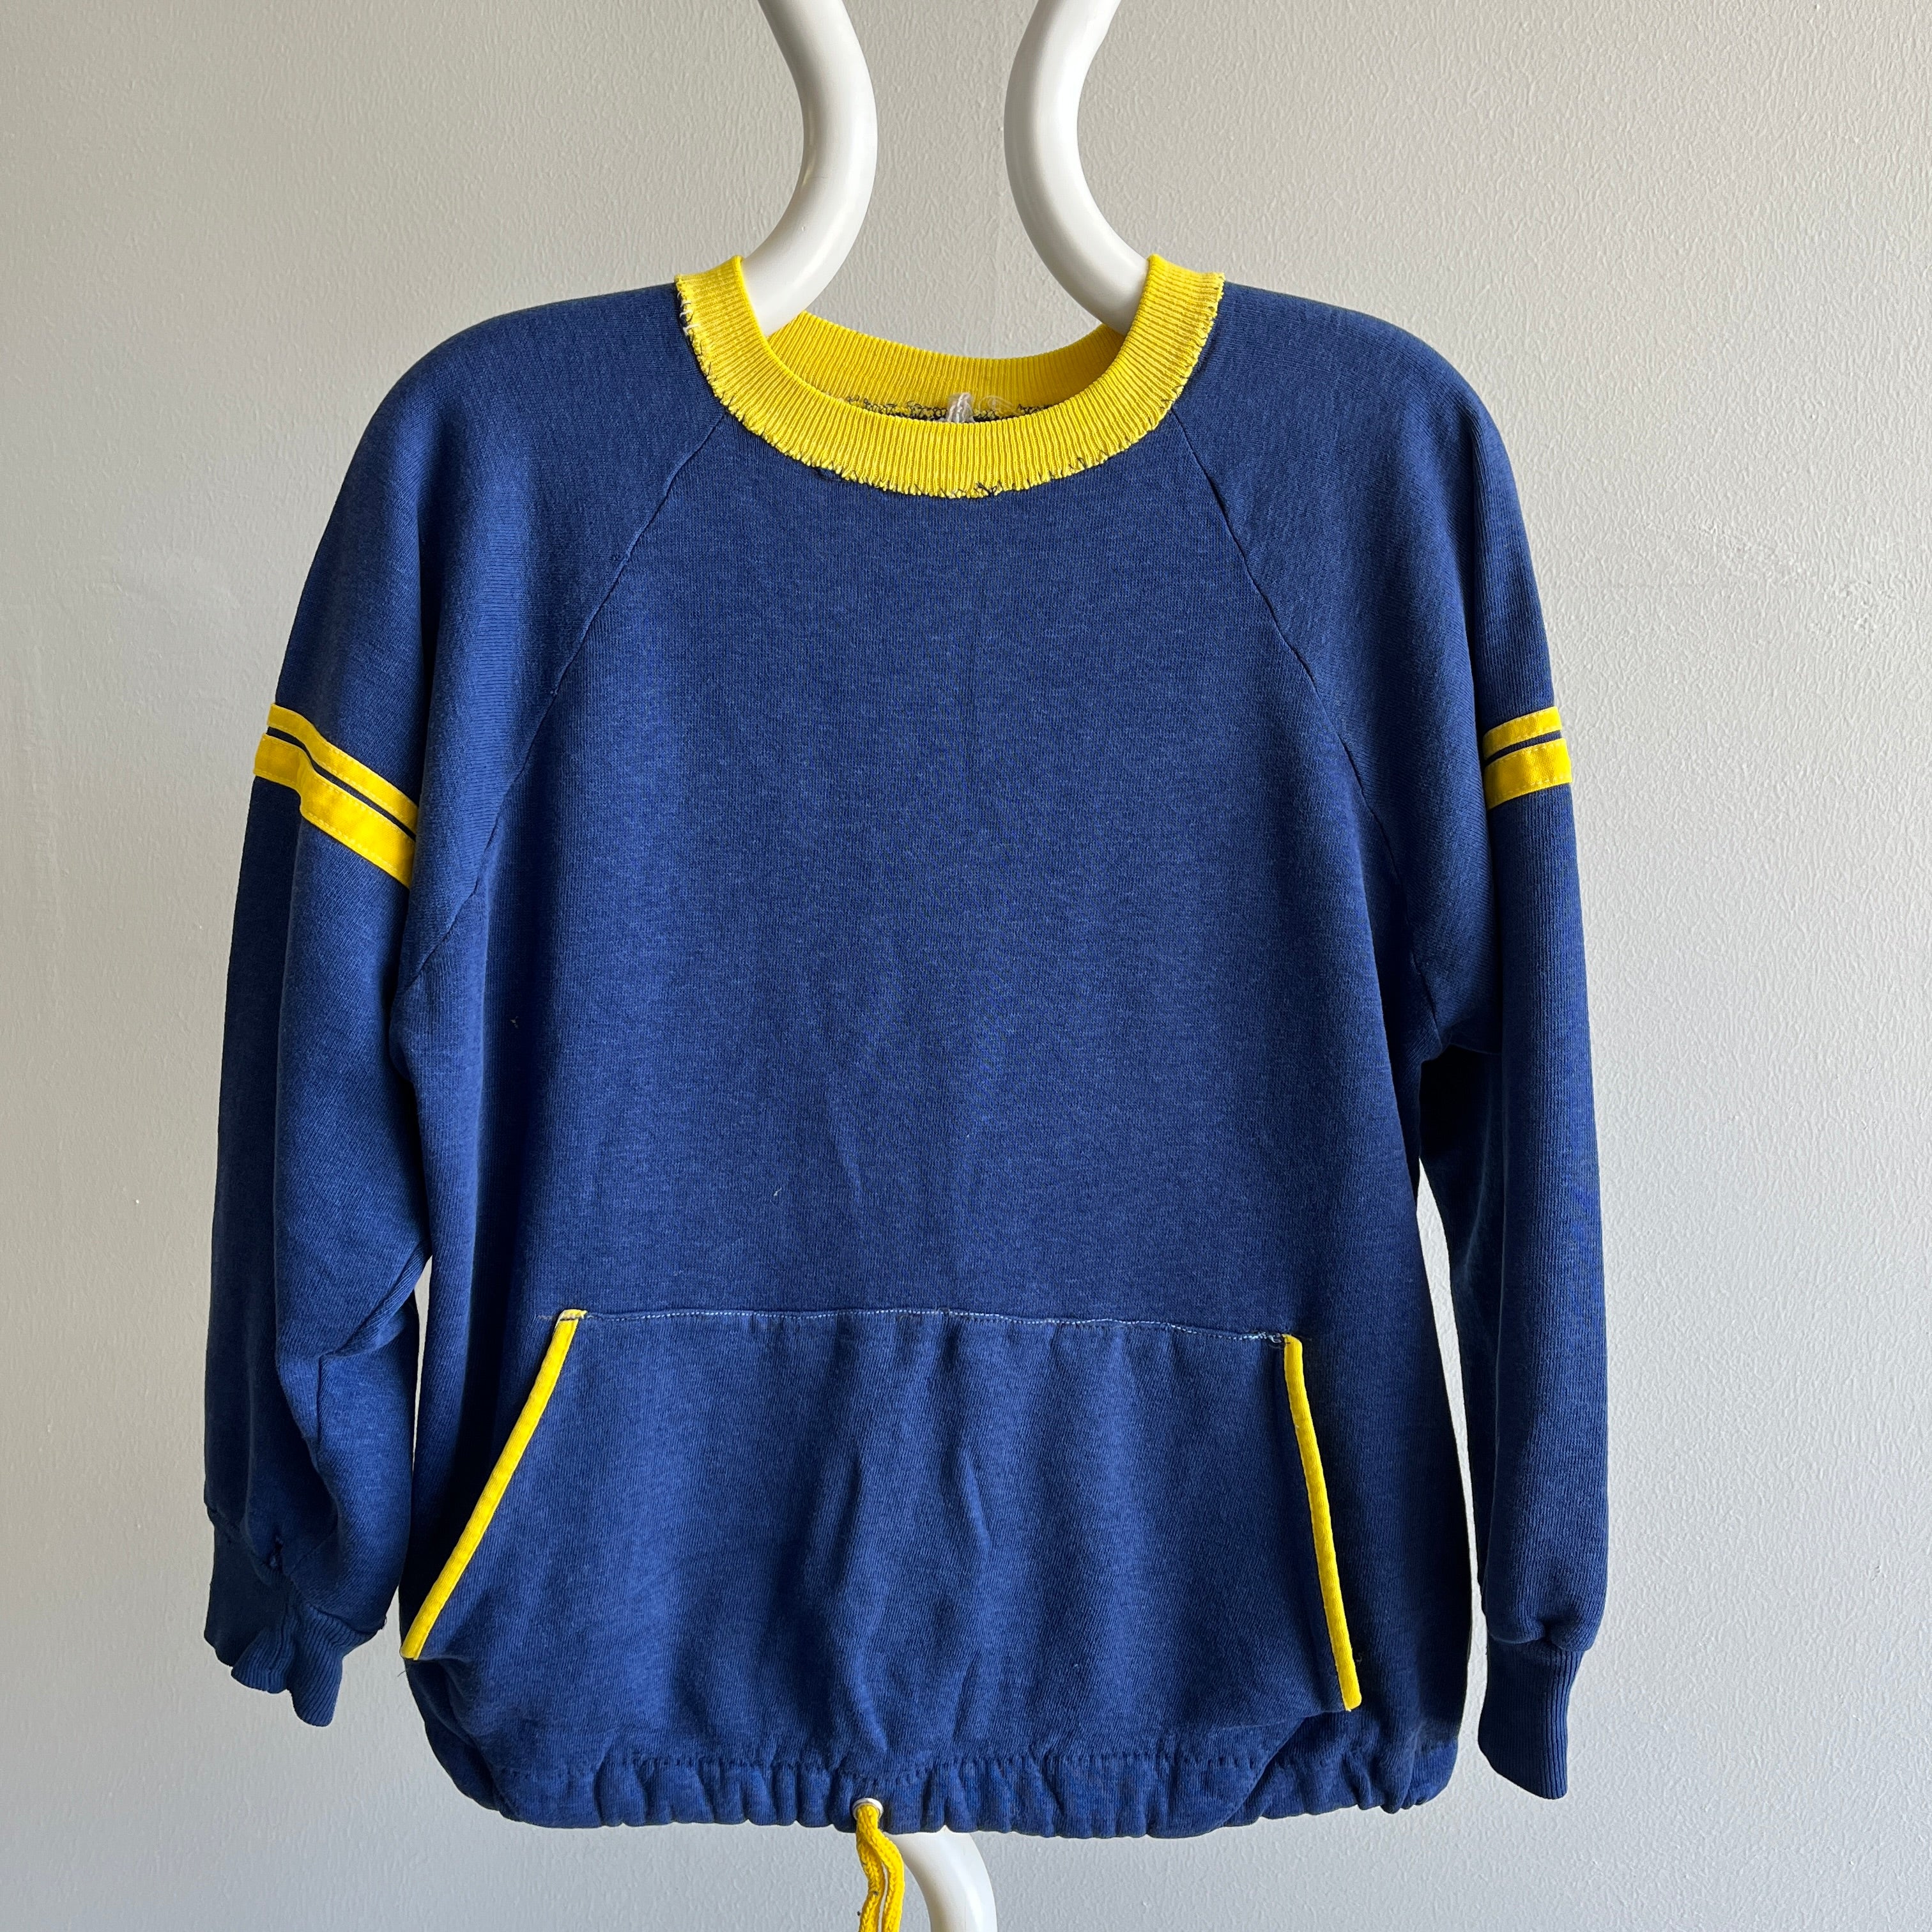 1970s Super Thin and Mended Navy and Yellow Sweatshirt - Personal Collection